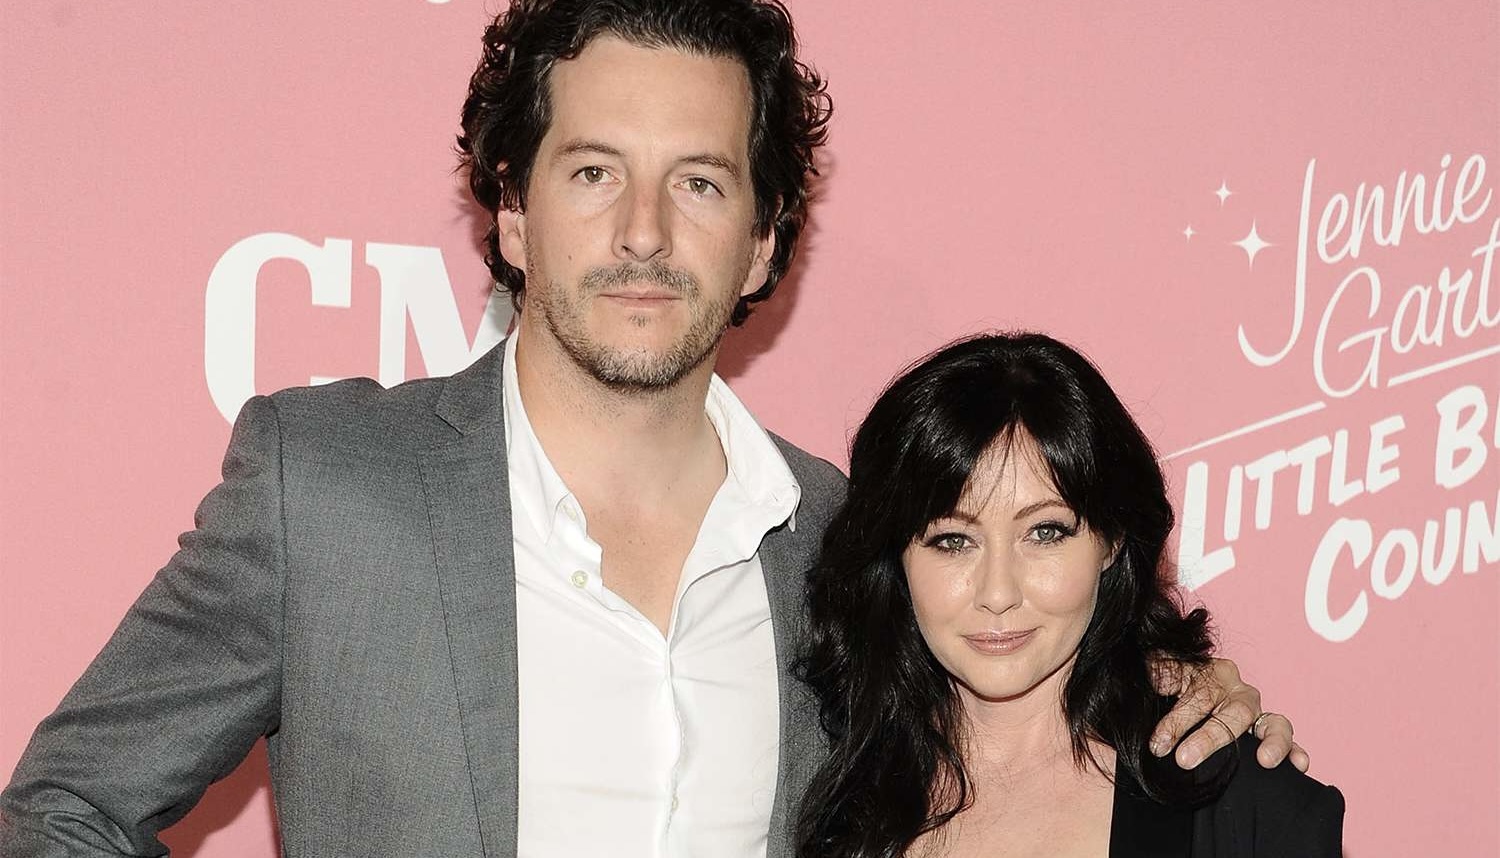 It’s Gonna Get Messy: After Filing for Divorce Shannen Doherty’s Reps Say, Husband’s Agent ‘Intimately Involved’